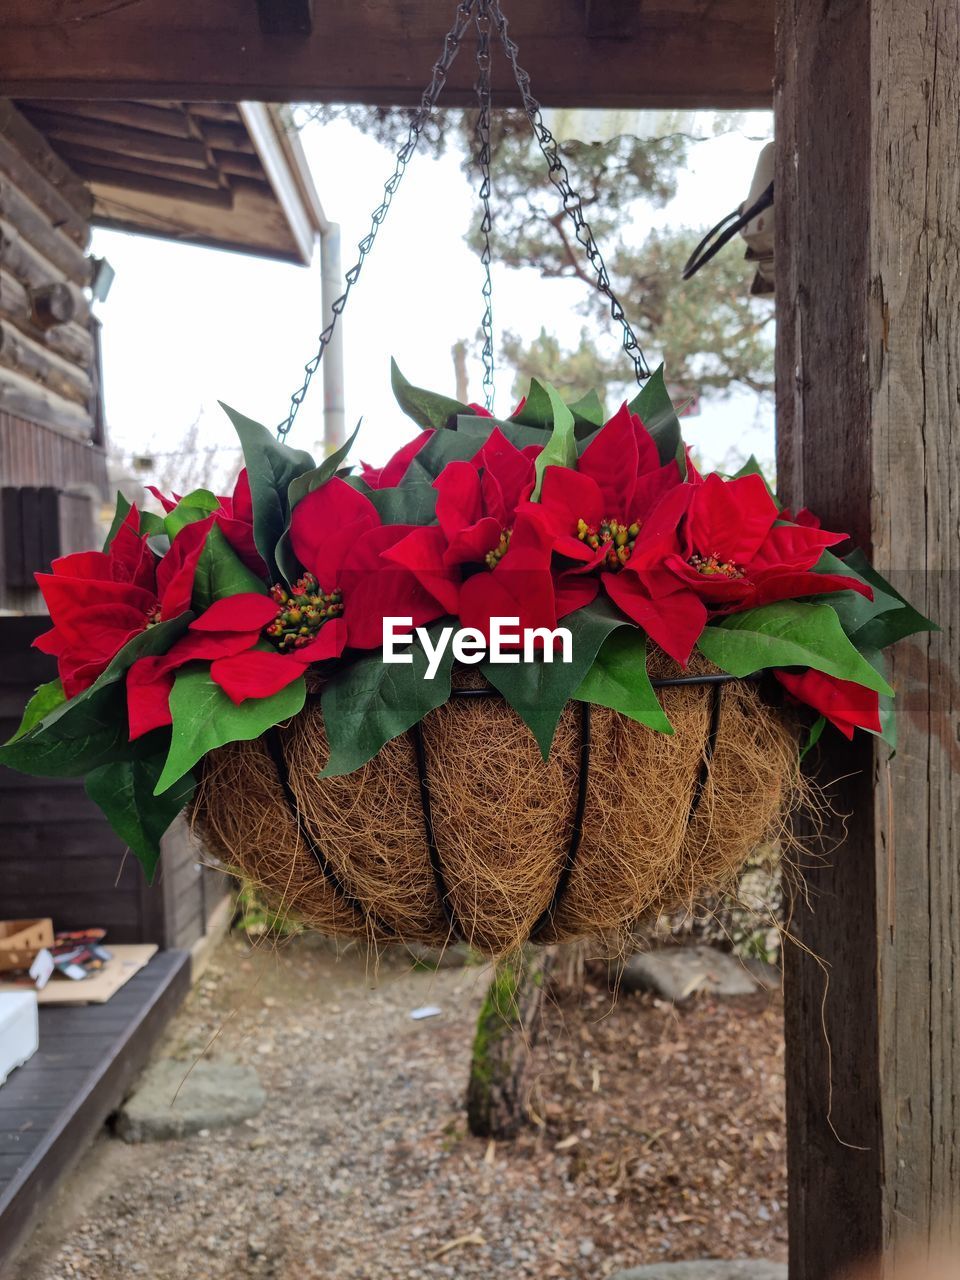 plant, nature, wood, no people, leaf, christmas decoration, flower, day, plant part, architecture, red, built structure, outdoors, decoration, flowering plant, tree, beauty in nature, building exterior, low angle view, holiday, growth, hanging